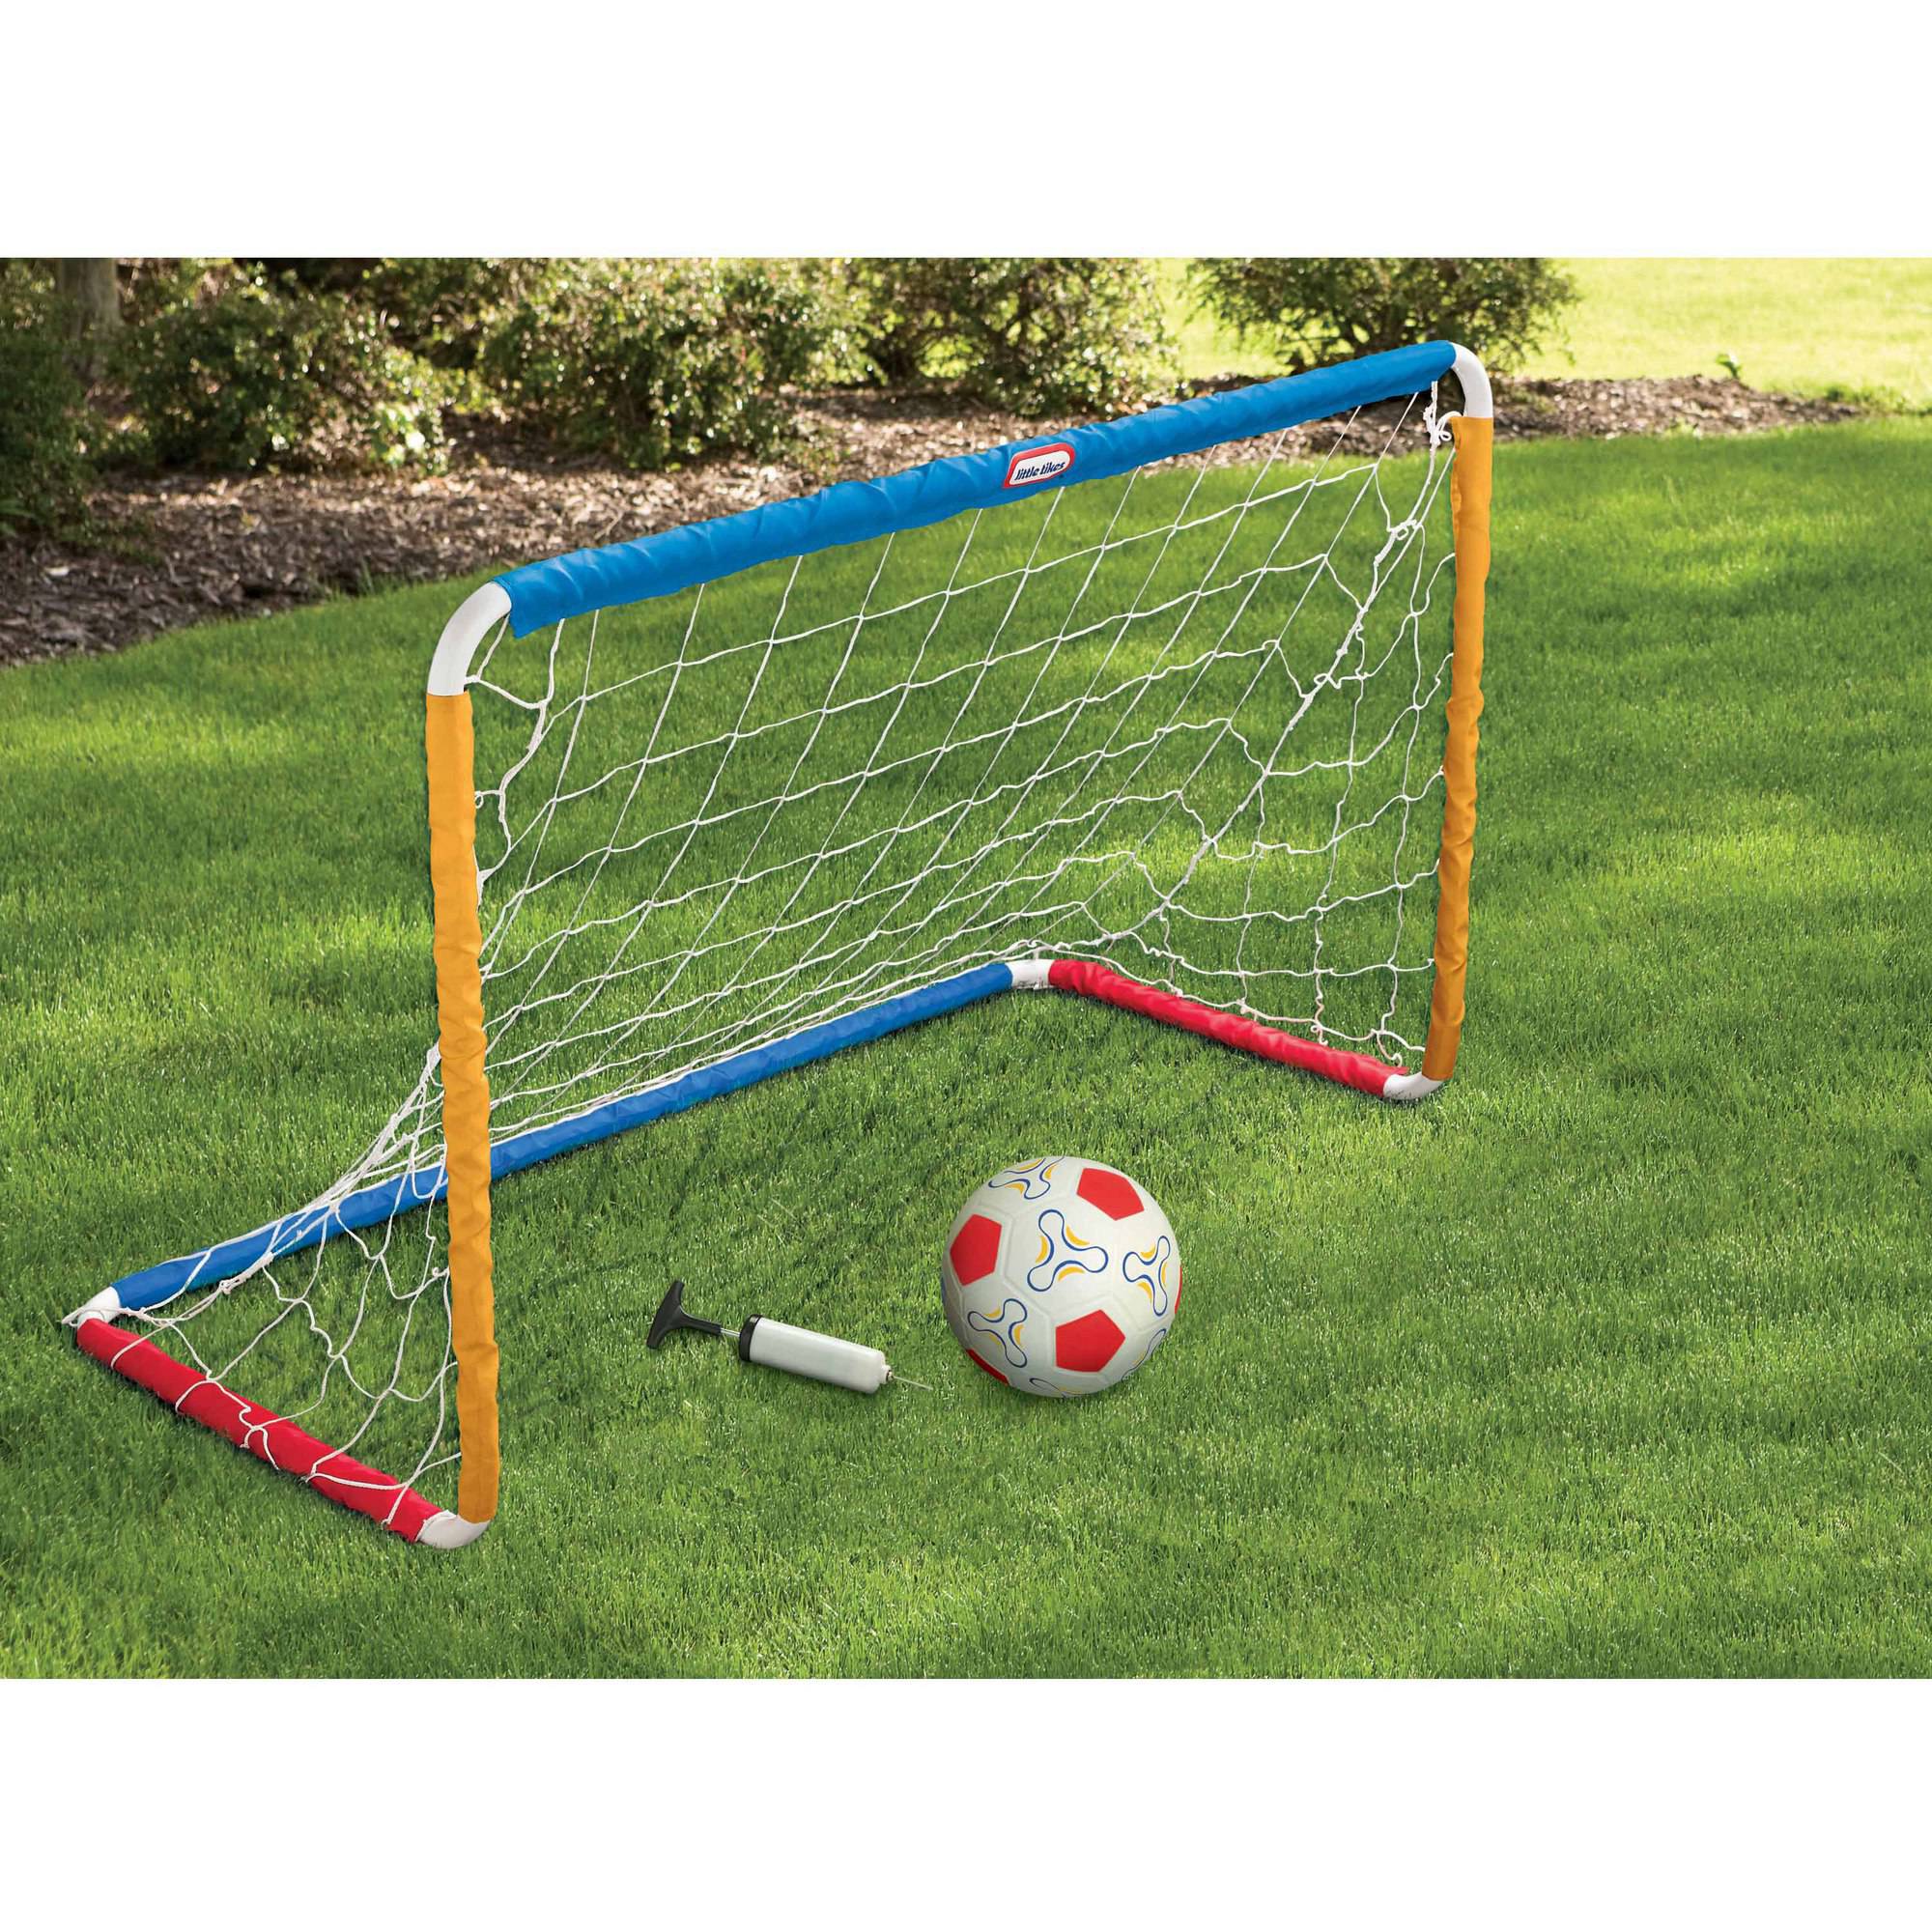 Little Tikes Easy Score Toy Soccer Set with Ball, Goal, and Pump- Toy Sports Play Set for Toddlers Kids Girls Boys Ages 3 4 5+ Year Old - image 5 of 5